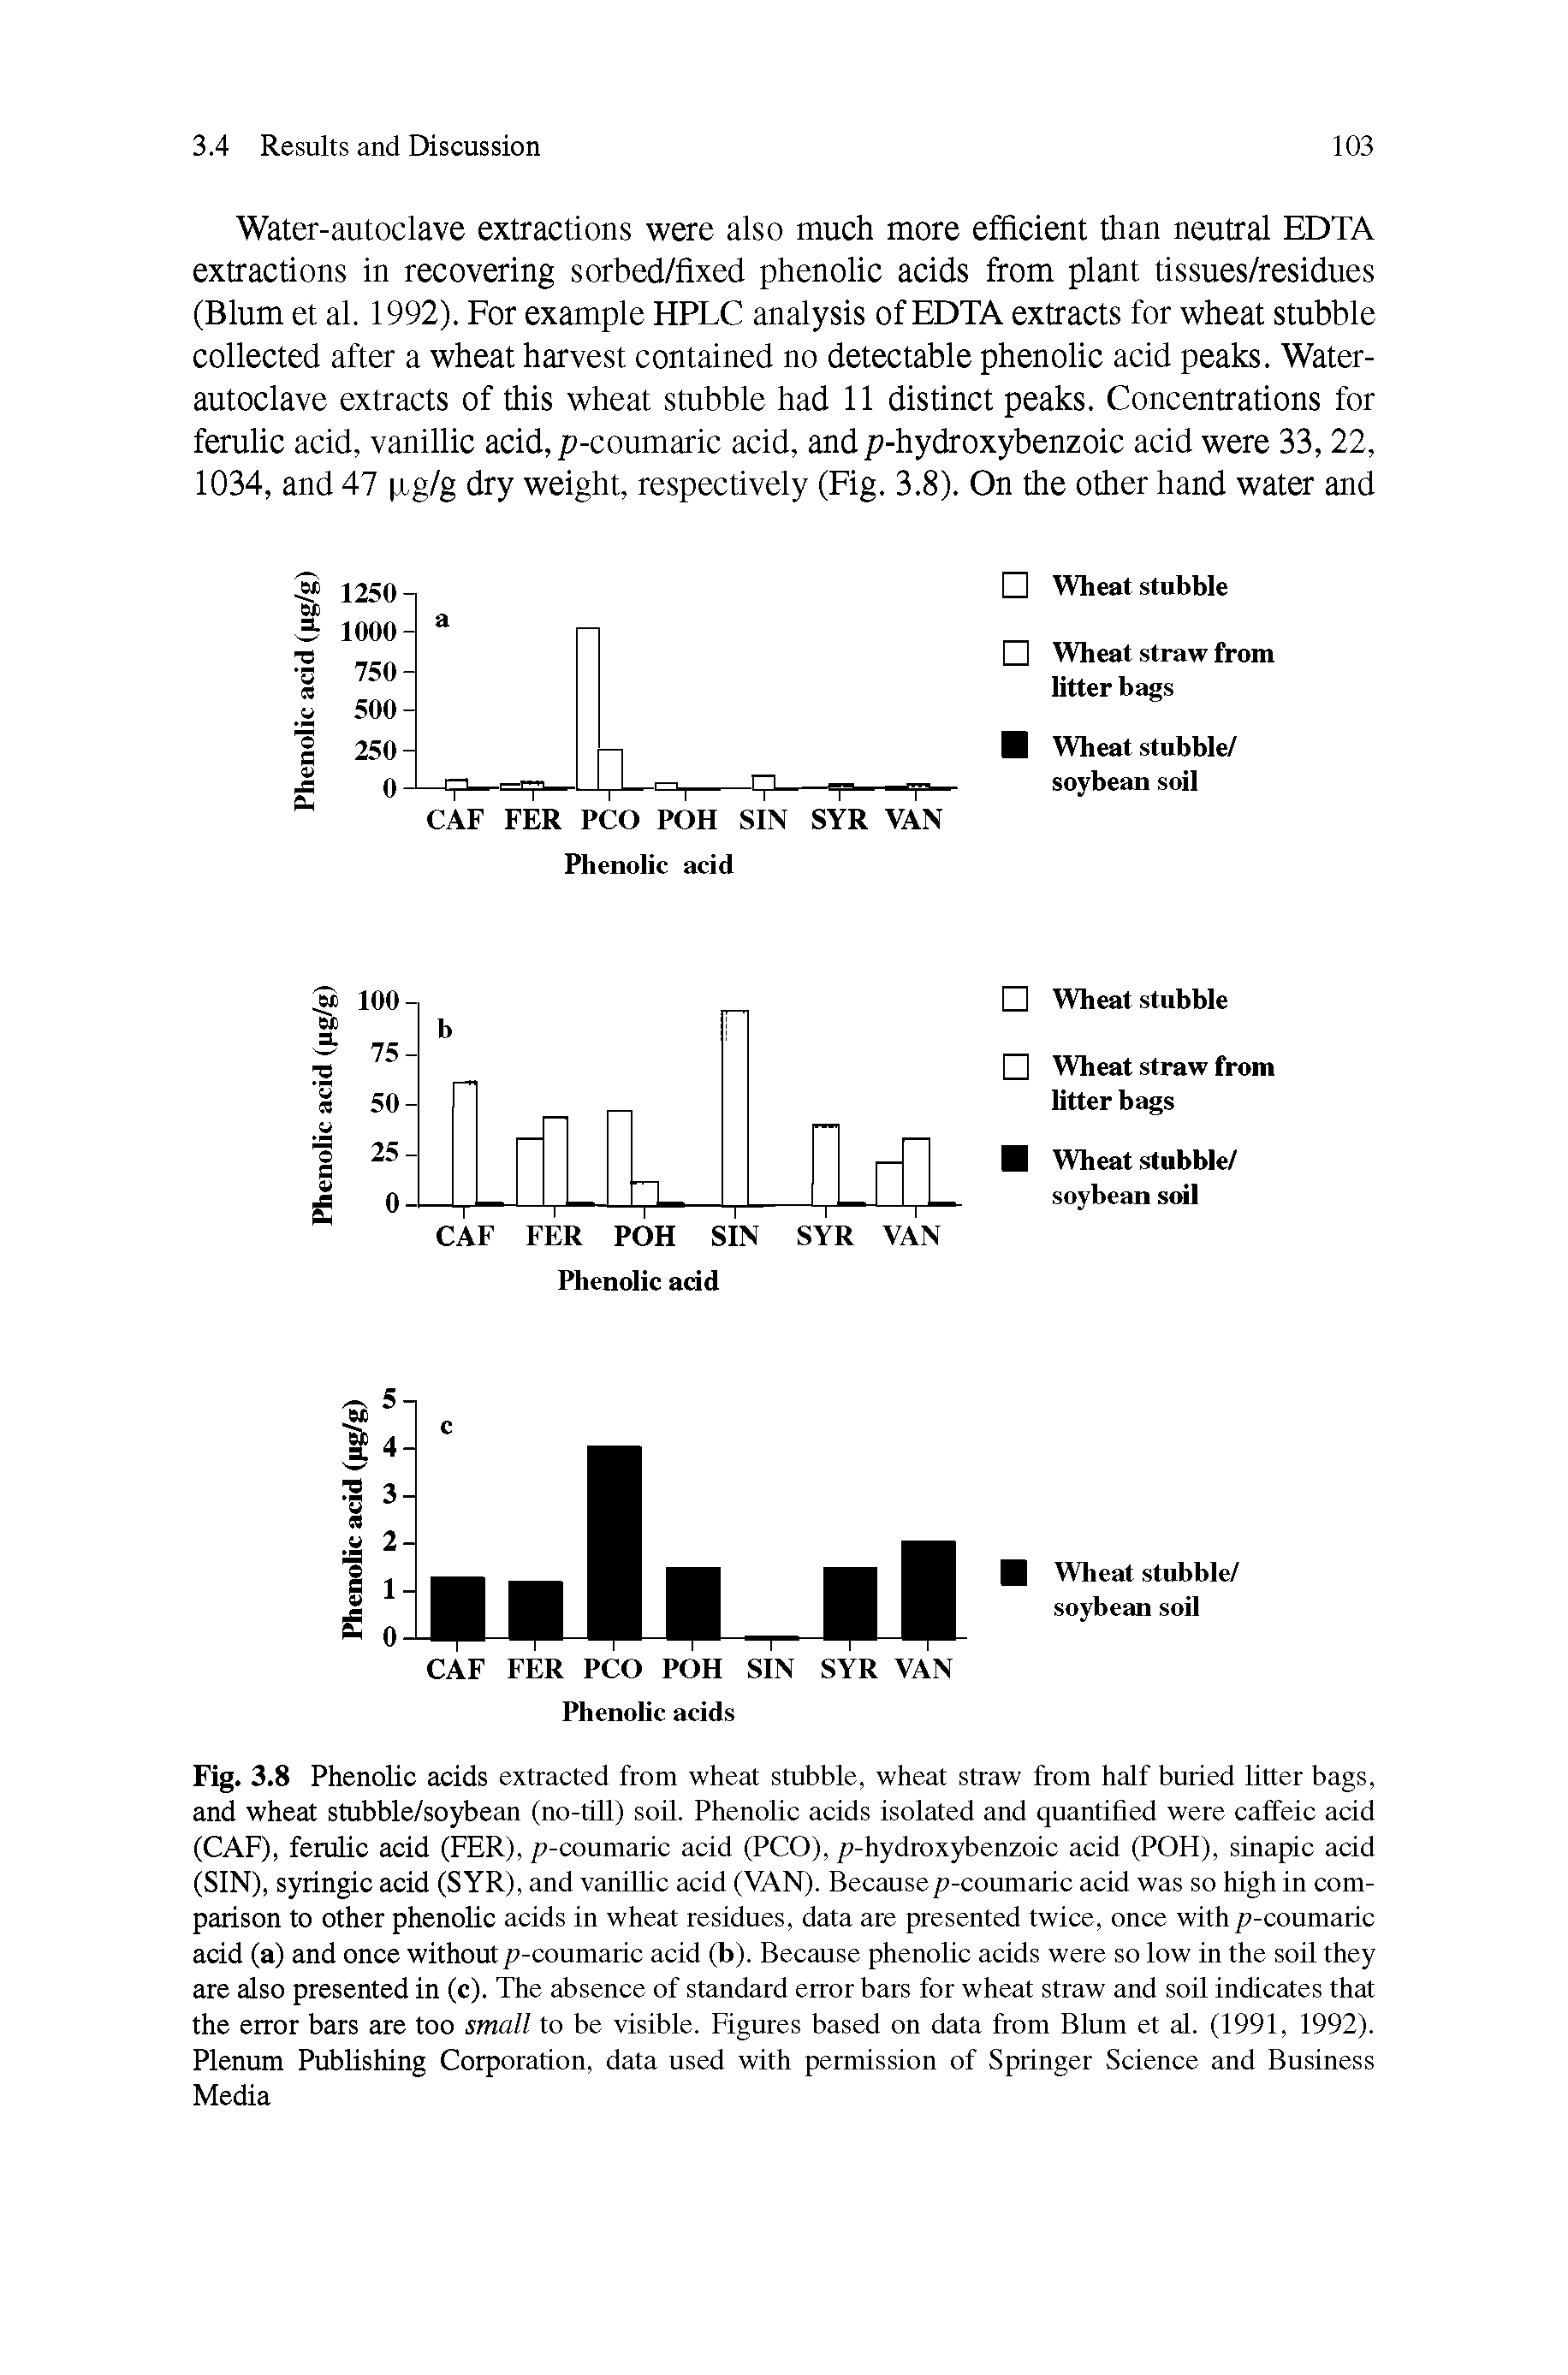 Fig. 3.8 Phenolic acids extracted from wheat stubble, wheat straw from half buried litter bags, and wheat stubble/soybean (no-till) soil. Phenolic acids isolated and quantified were caffeic acid (CAF), ferulic acid (FER), p-coumaric acid (PCO), p-hydroxybenzoic acid (POH), sinapic acid (SIN), syringic acid (SYR), and vanillic acid (VAN). Becausep-coumaric acid was so high in comparison to other phenolic acids in wheat residues, data are presented twice, once with p-coumaric acid (a) and once without p-coumaric acid (b). Because phenolic acids were so low in the soil they are also presented in (c). The absence of standard error bars for wheat straw and soil indicates that the error bars are too small to be visible. Figures based on data from Blum et al. (1991, 1992). Plenum Publishing Corporation, data used with permission of Springer Science and Business Media...